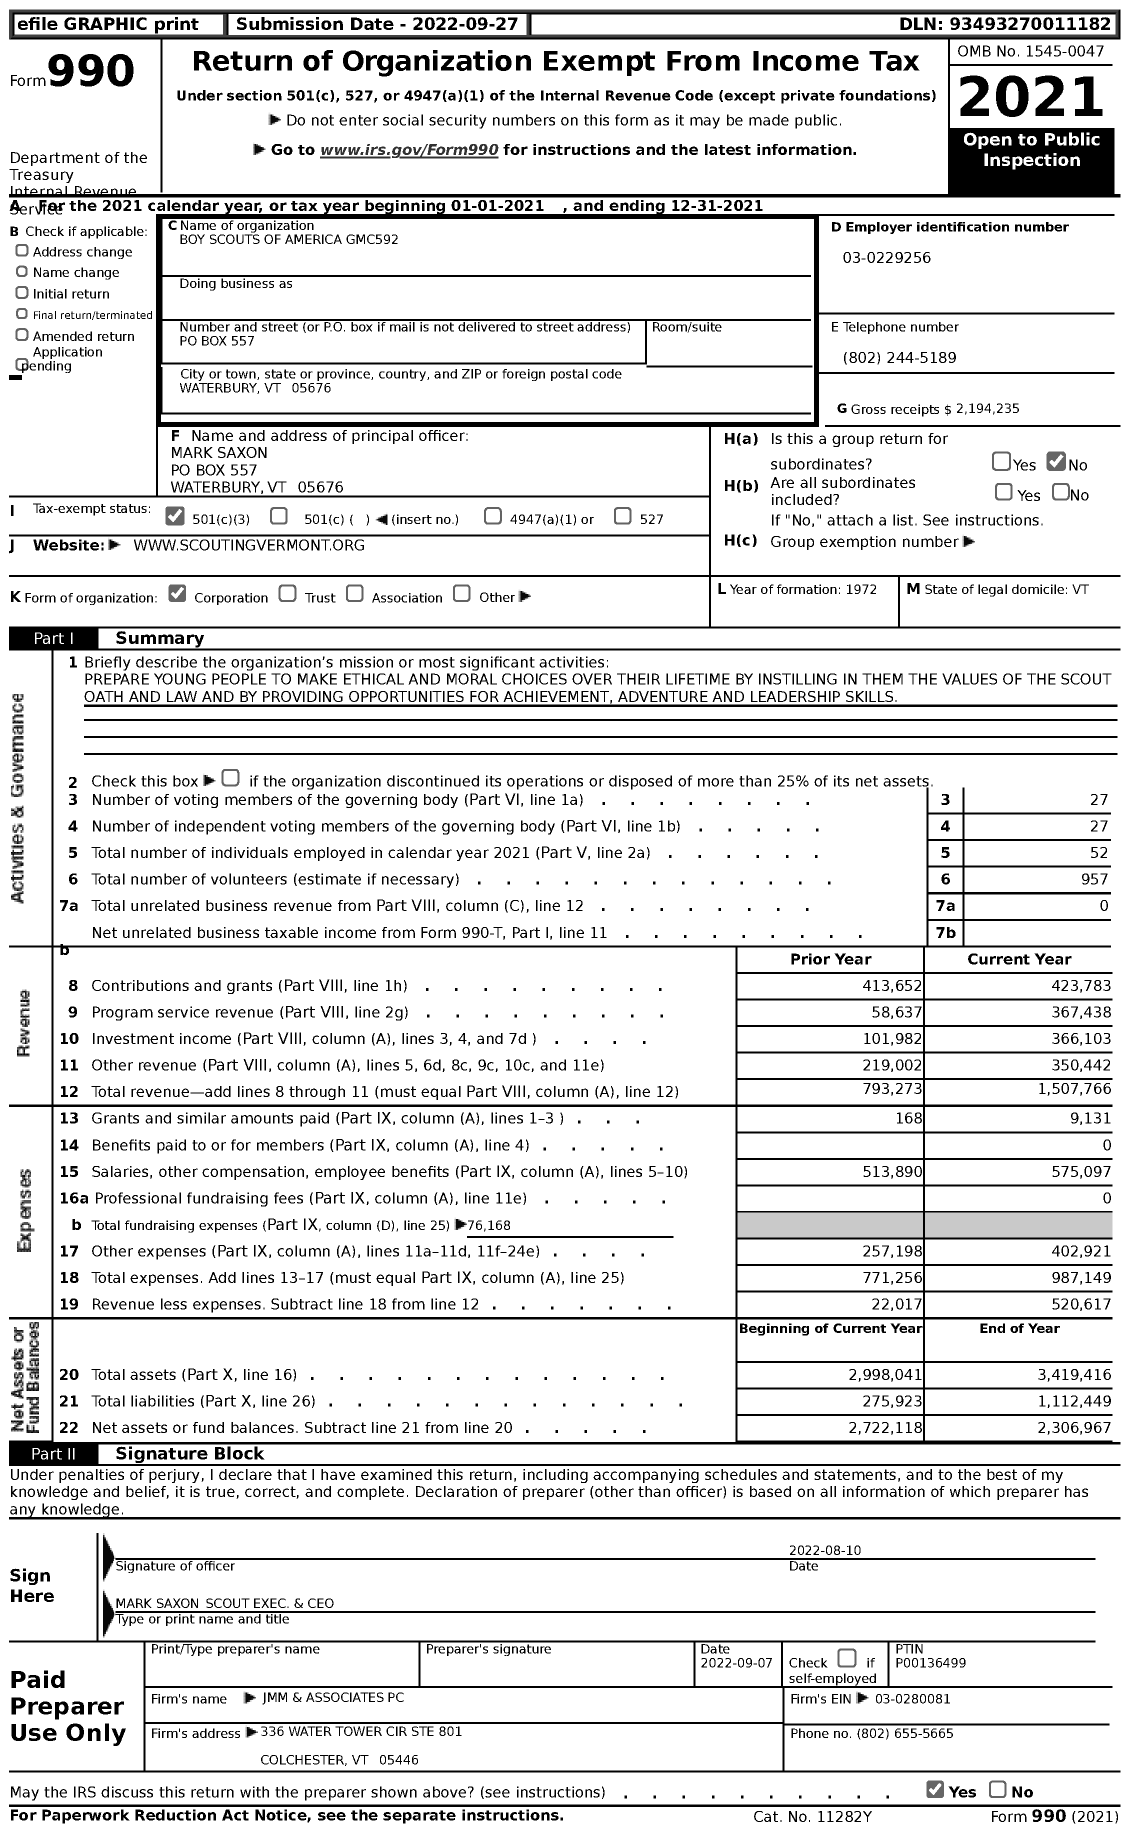 Image of first page of 2021 Form 990 for Boy Scouts of America GMC592